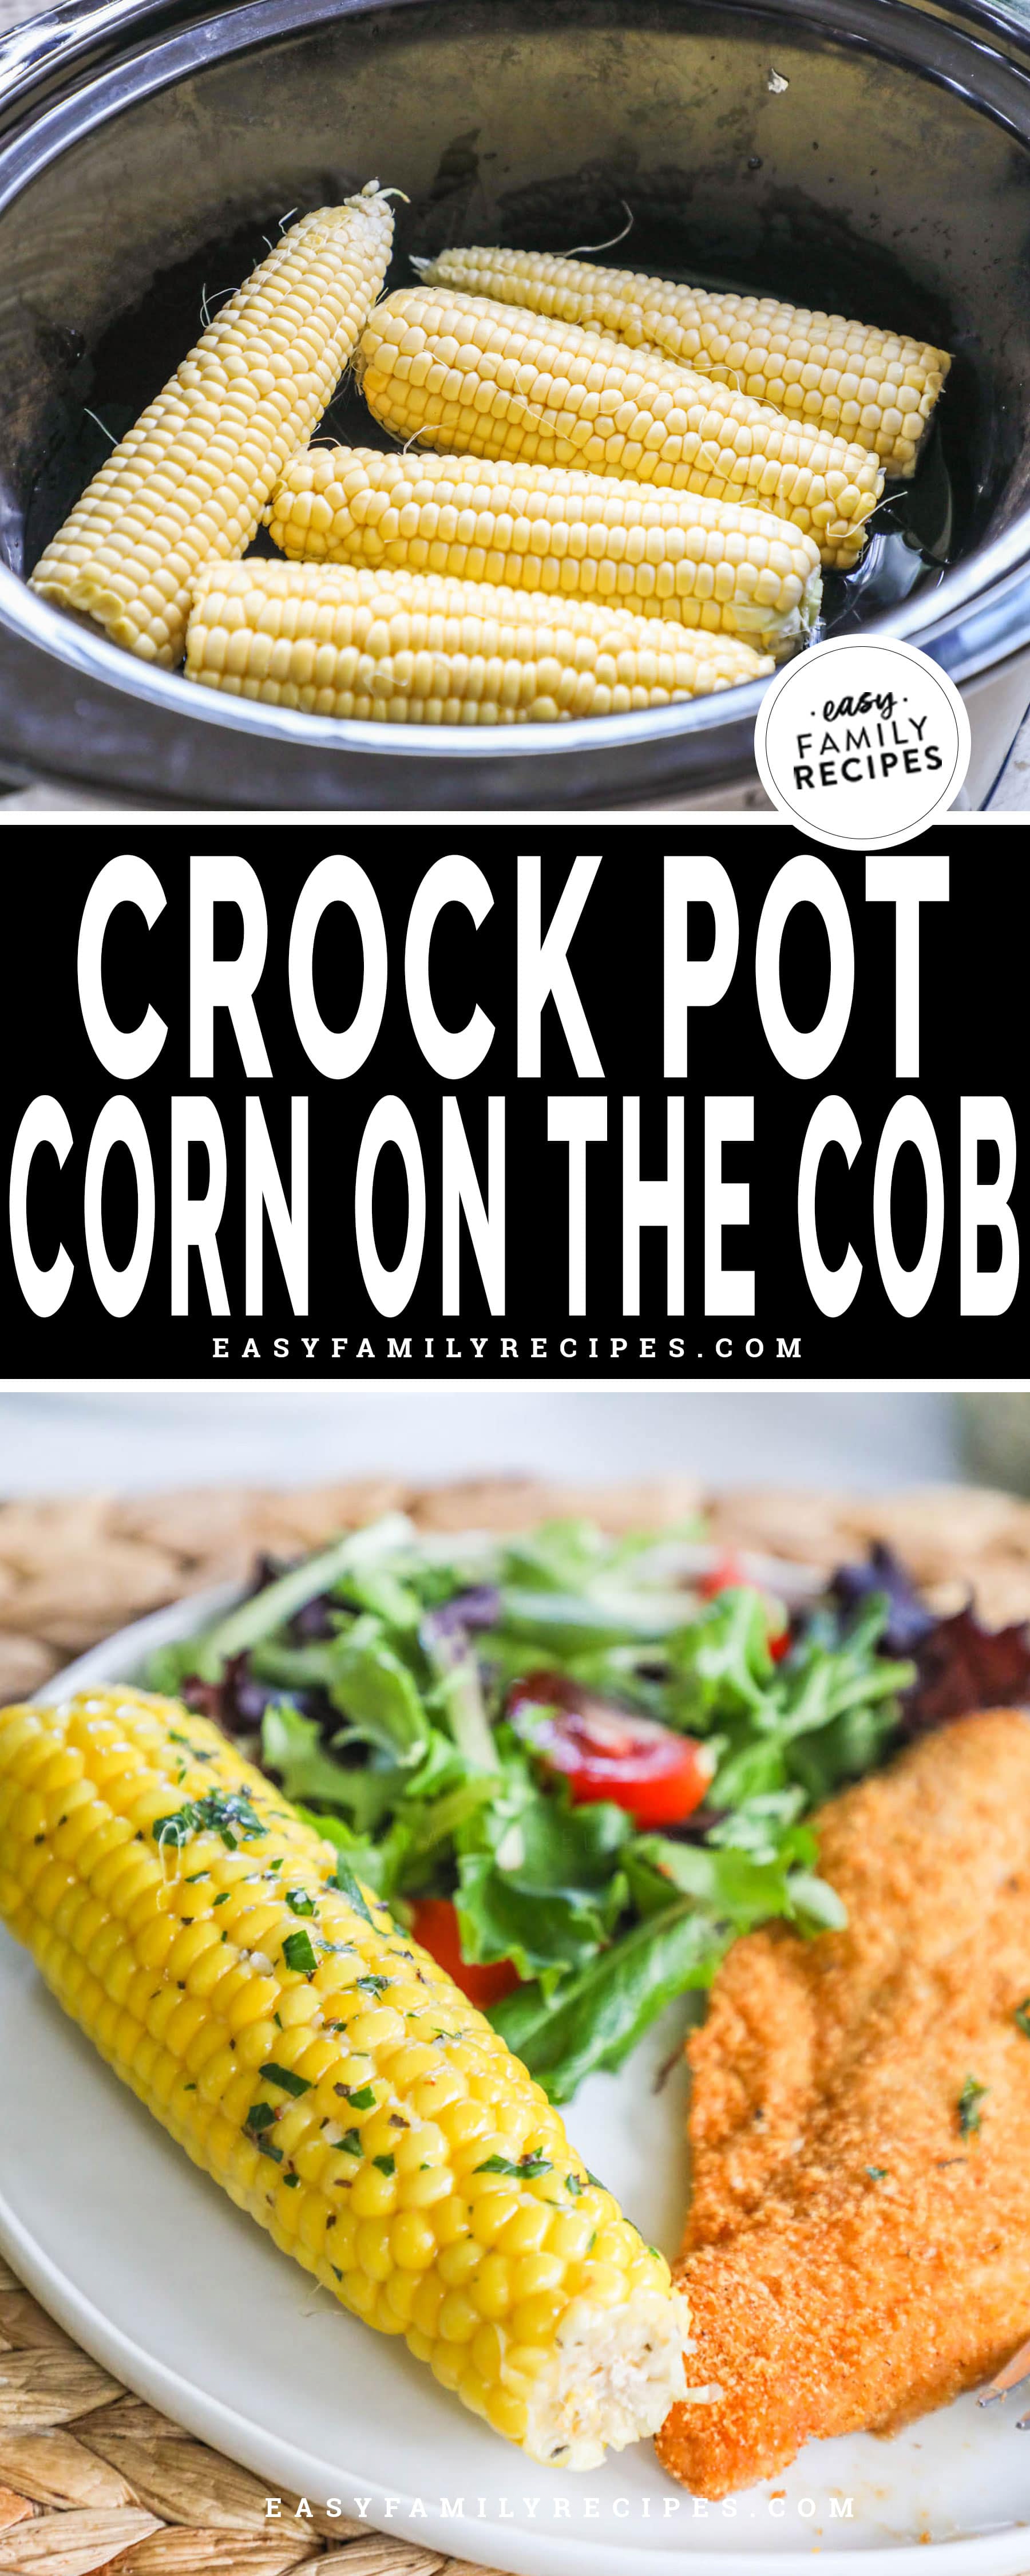 Image collage of uncooked husked corn cobs in a crock pot and then a plate with cooked born cob served with a salad and fried fish.